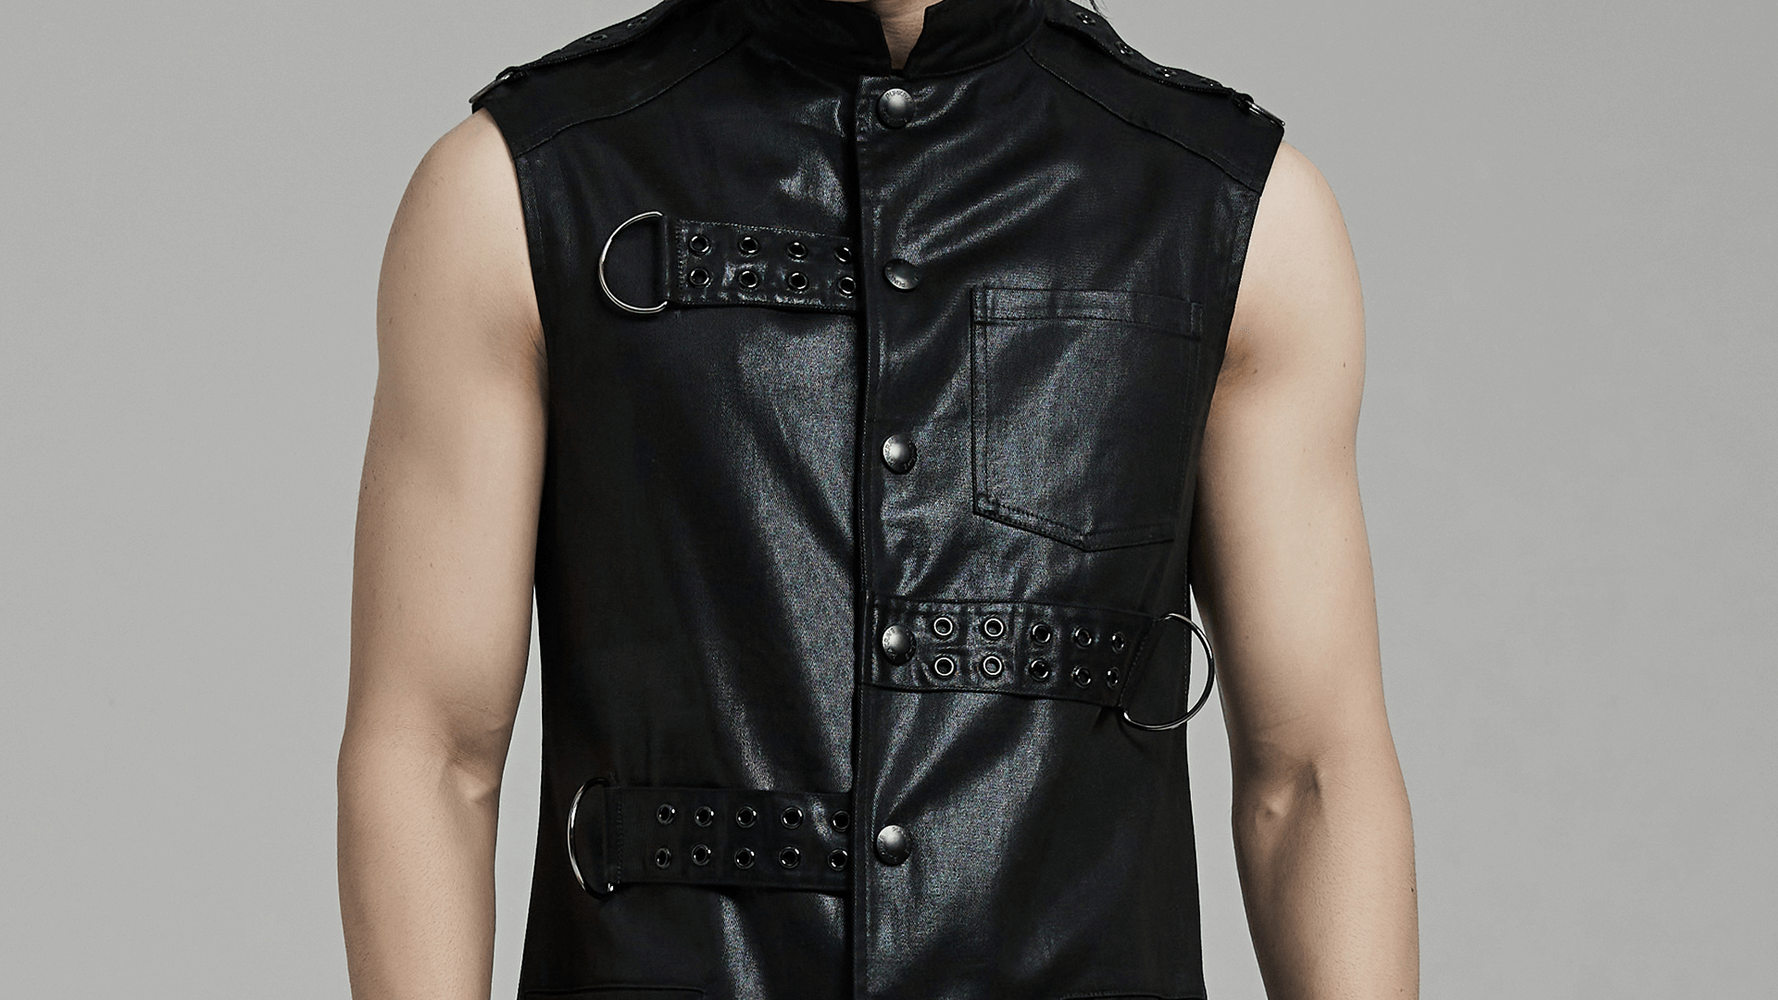 Men's Leather Punk Style Long Cape with Straps